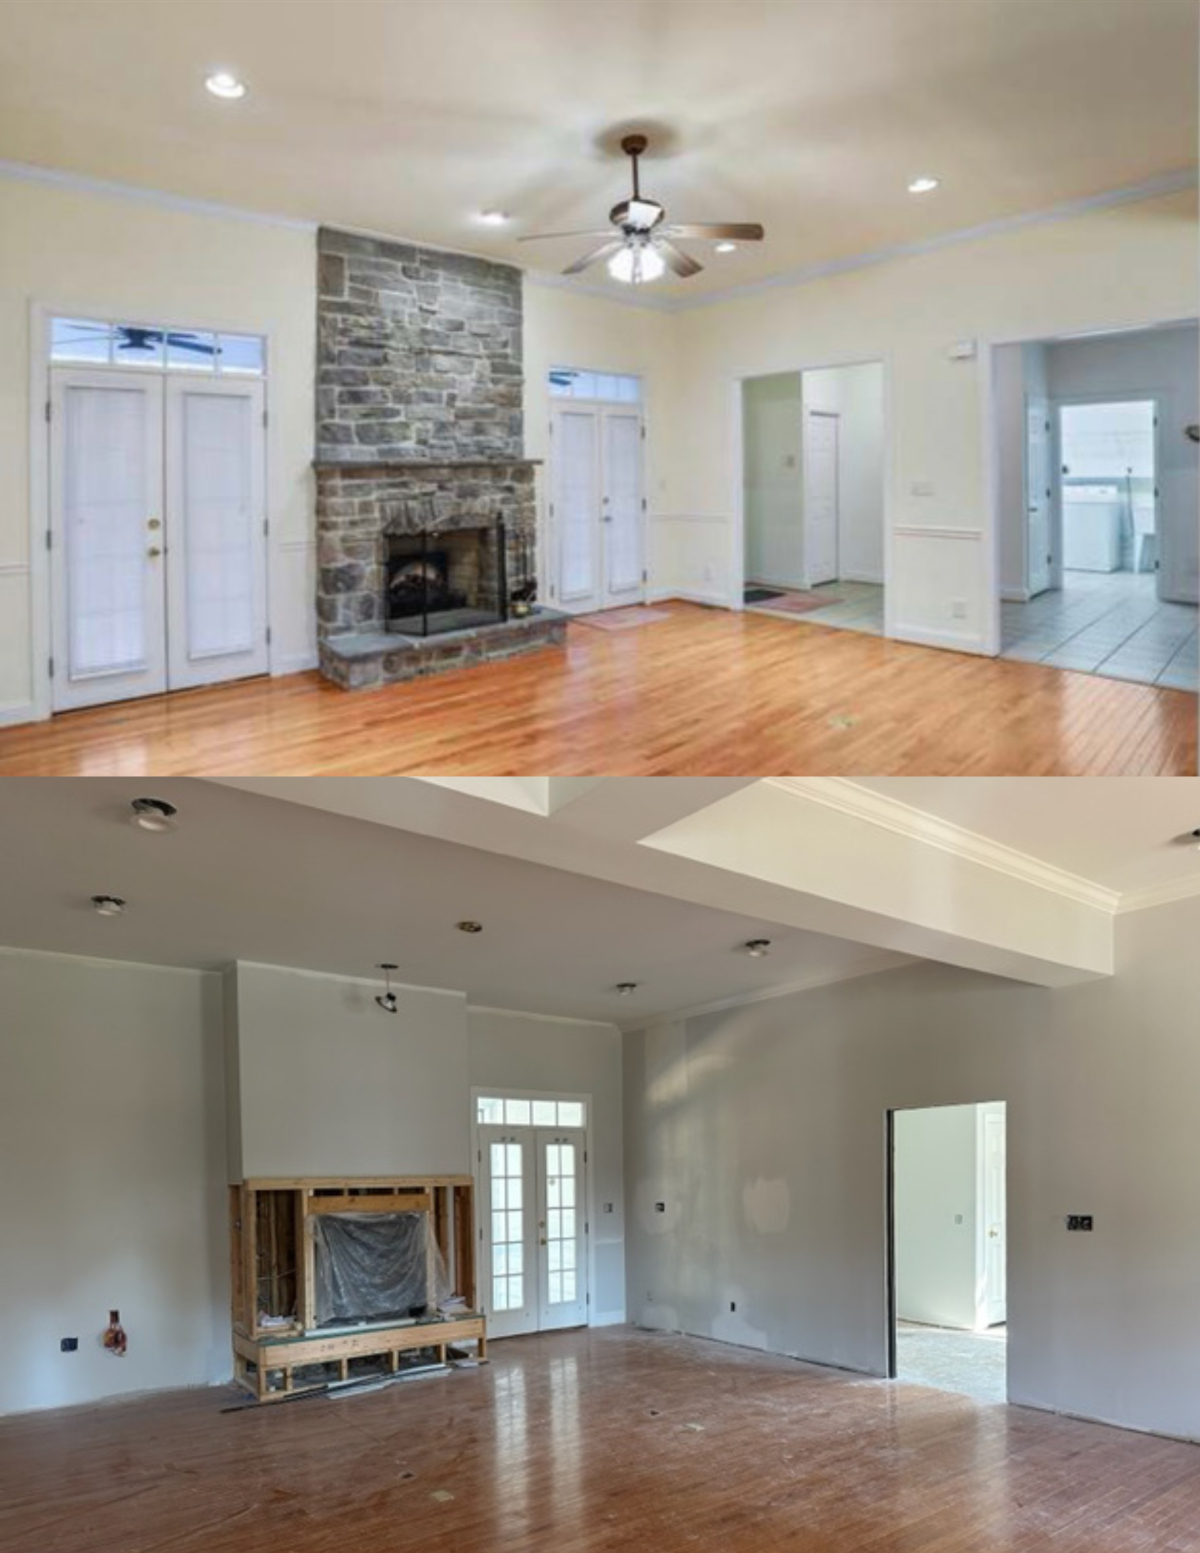 Living room before (top) and after (bottom).